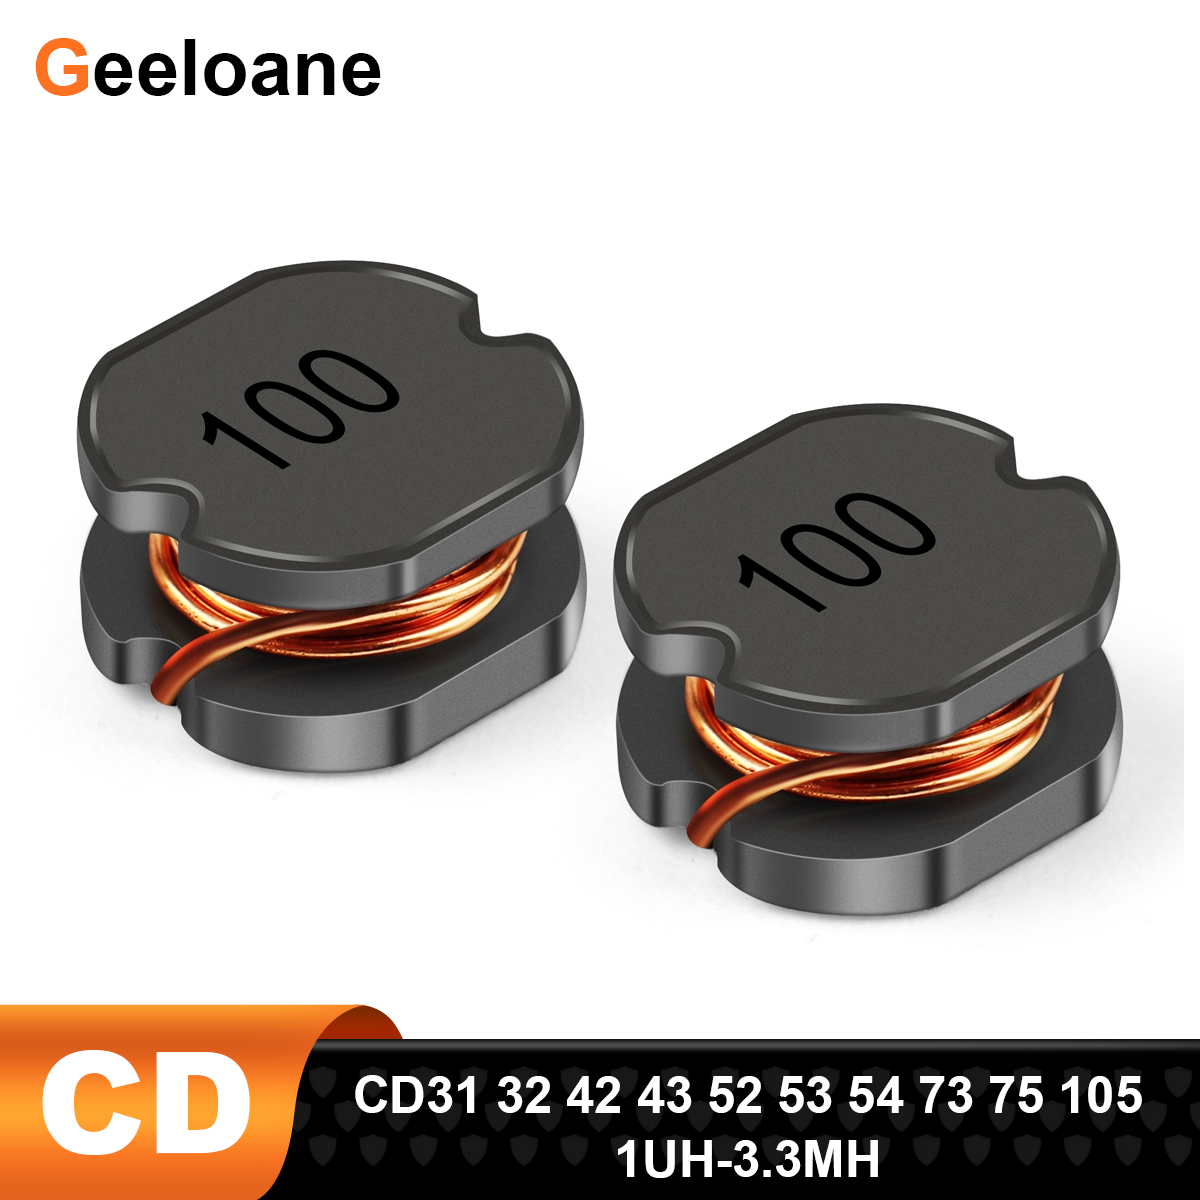 Inductoire SMD haute puissance CD31 CD32 CD42 CD43 CD52 CD53 CD54 CD73 CD75 CD105 1UH-3.3MH Inductance de puissance